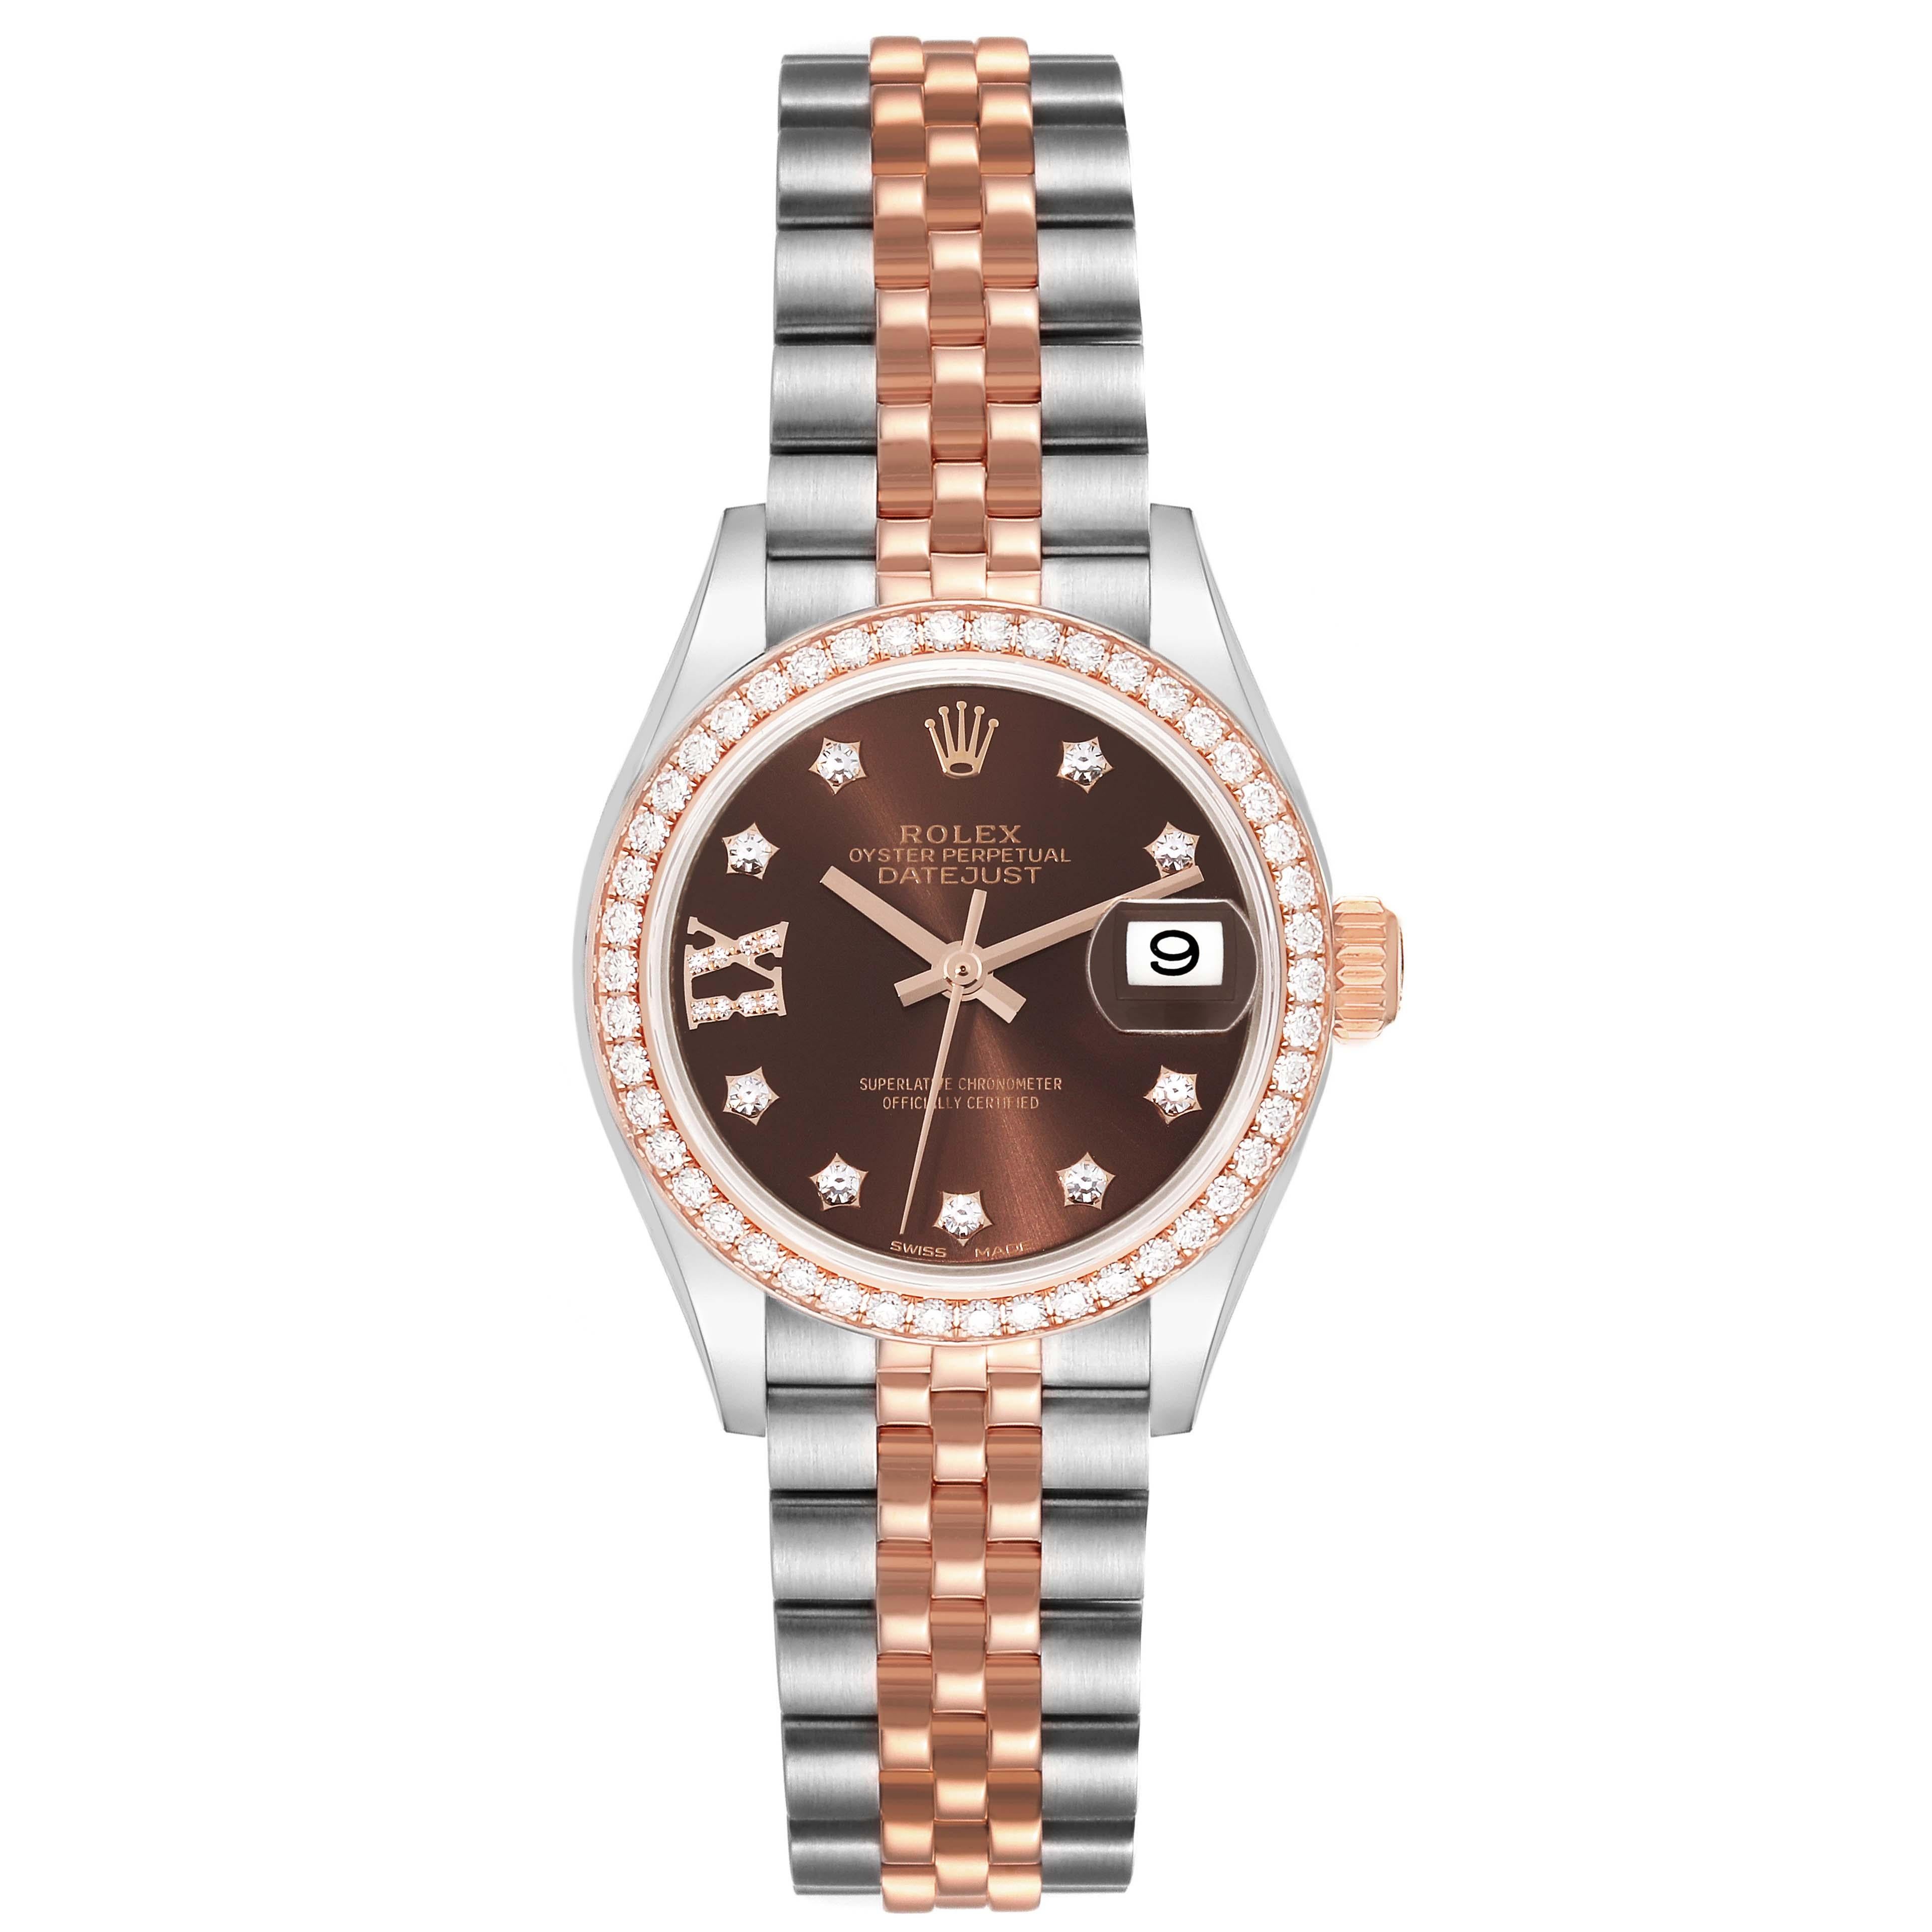 Rolex Datejust 28 Steel Rolesor Rose Gold Diamond Ladies Watch 279381 Box Card. Officially certified chronometer automatic self-winding movement. Stainless steel oyster case 28.0 mm in diameter. Rolex logo on a 18K rose gold crown. 18k rose gold